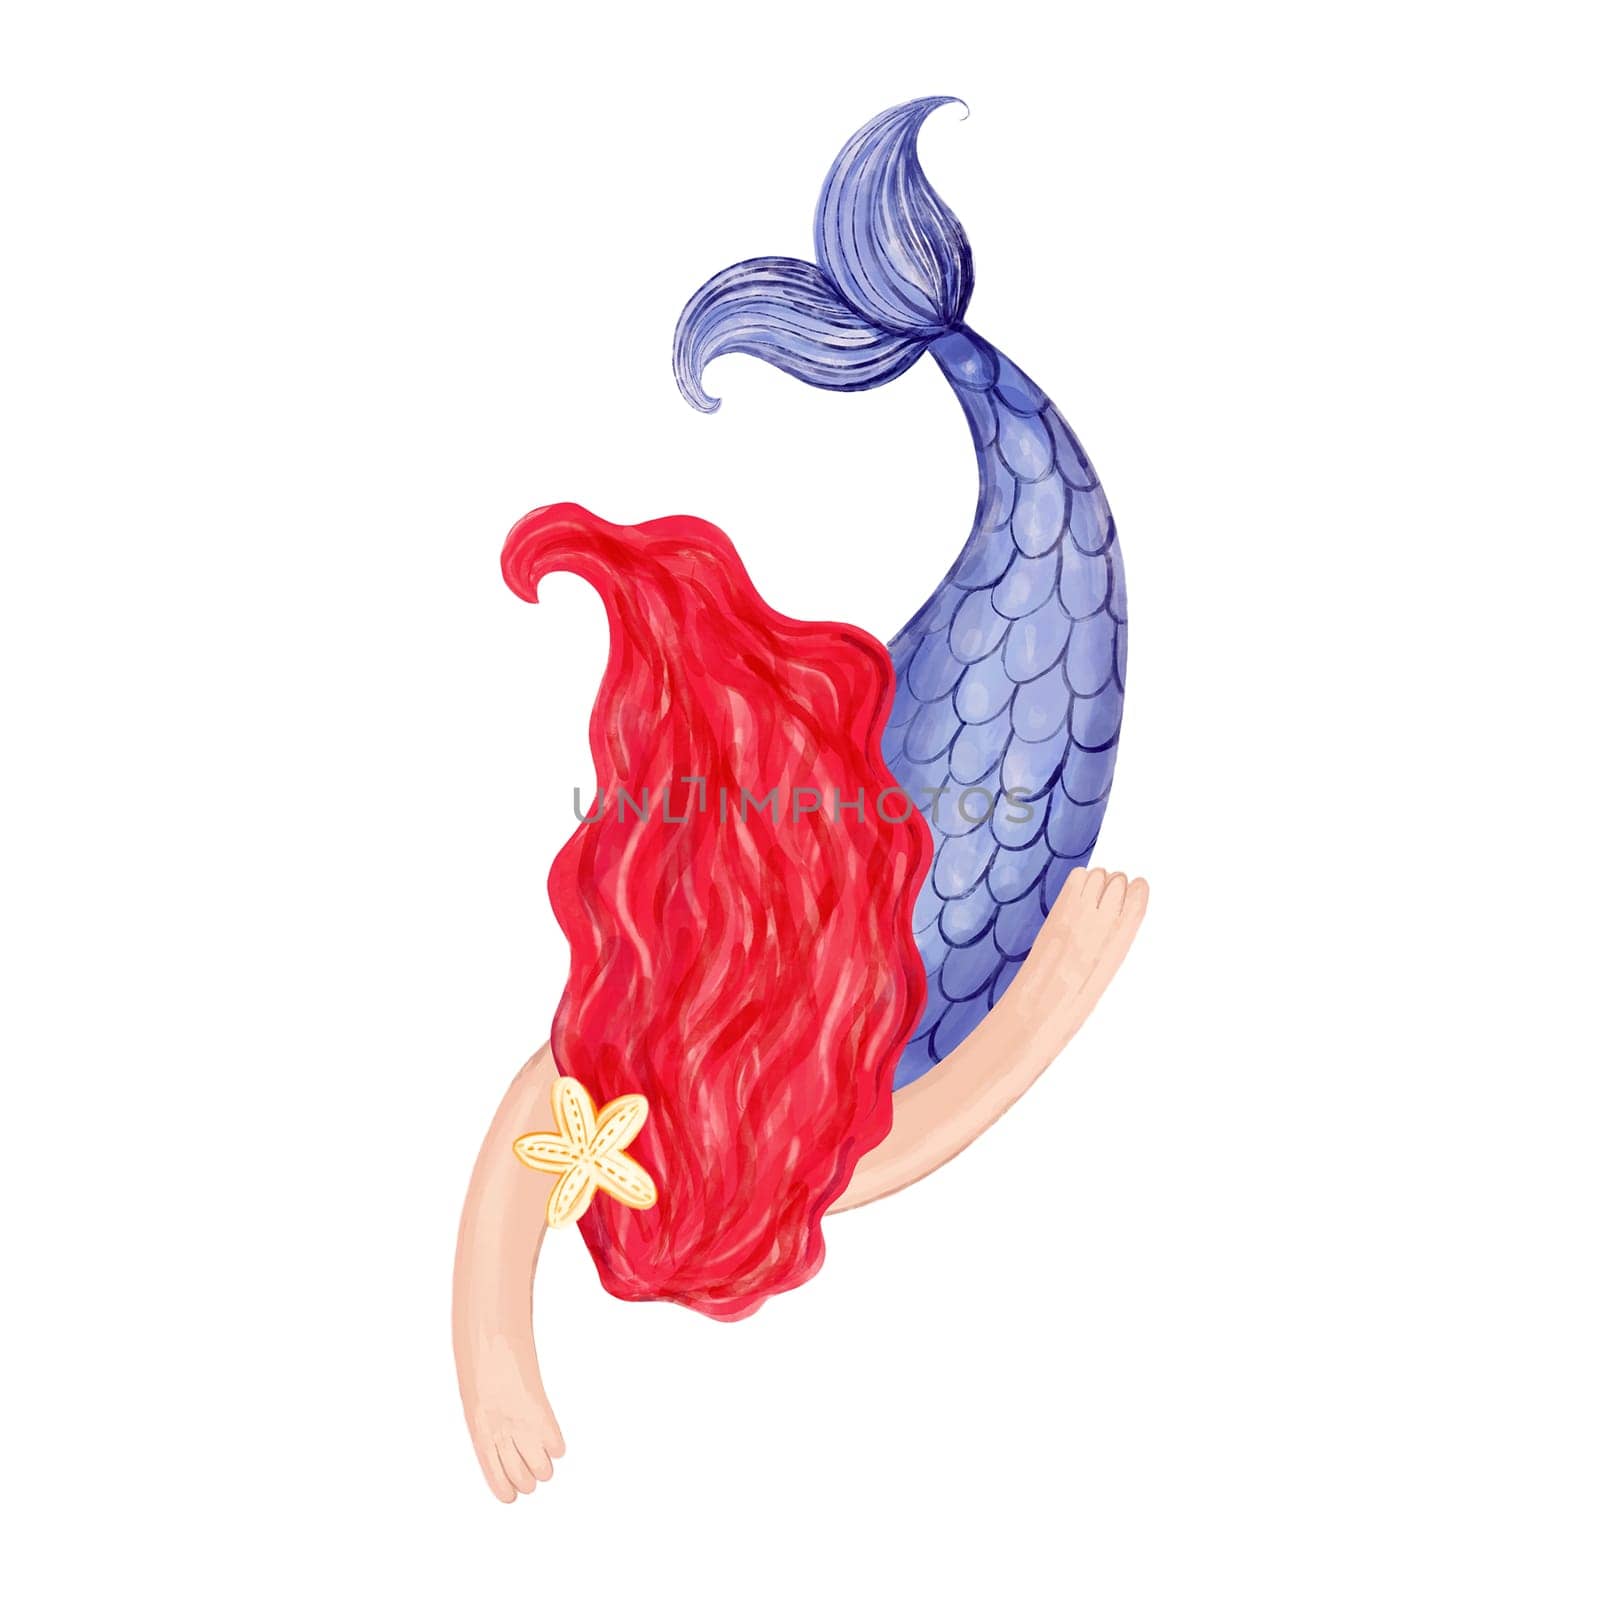 Cute mermaid with red hair on a white background. Hand-drawn watercolor illustration